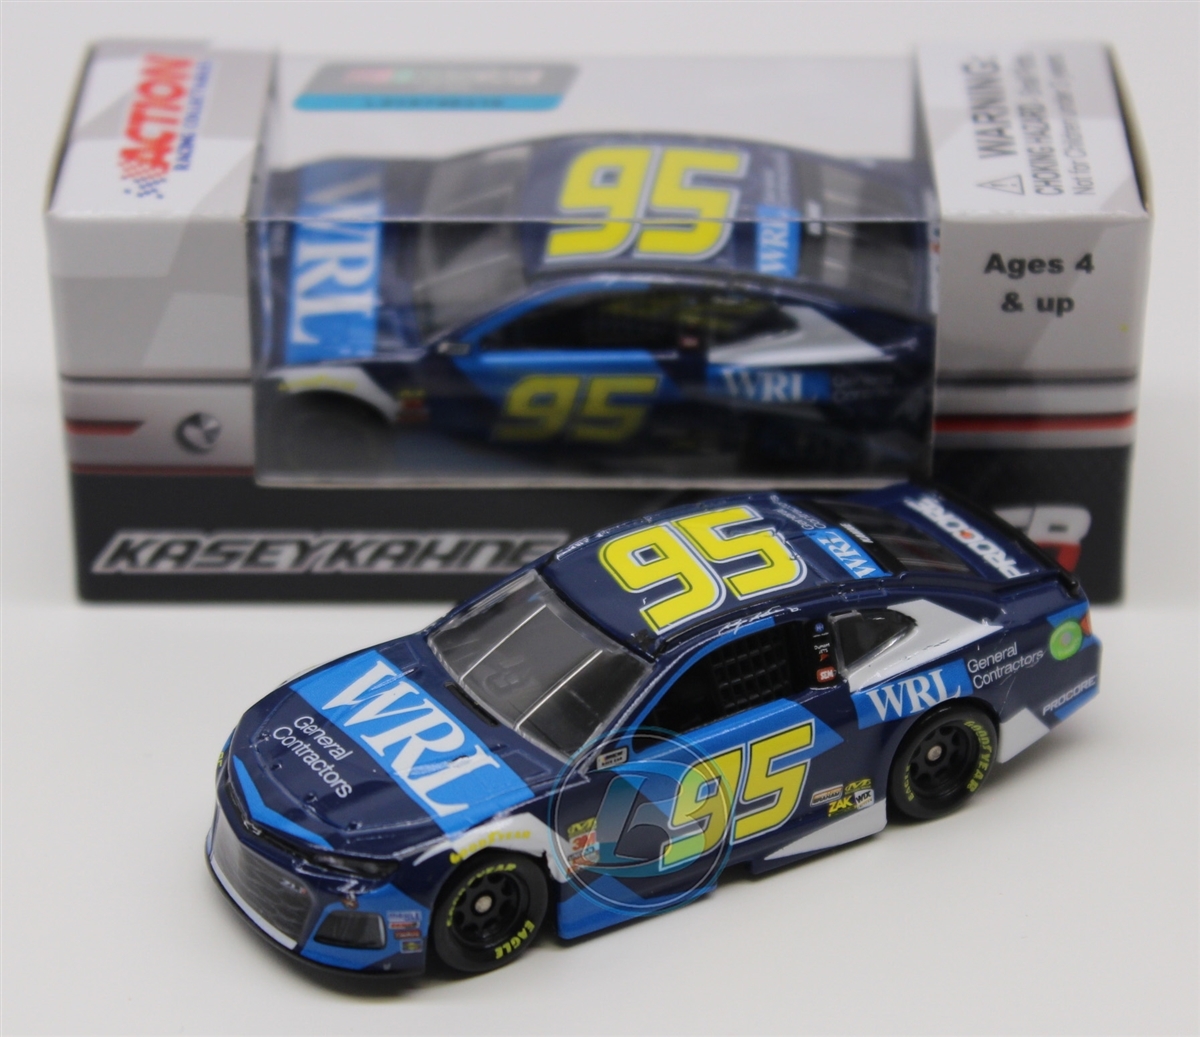 KASEY KAHNE #95 2018 WRL GENERAL CONTRACTORS 1/24 SCALE NEW IN STOCK FREE SHIP 